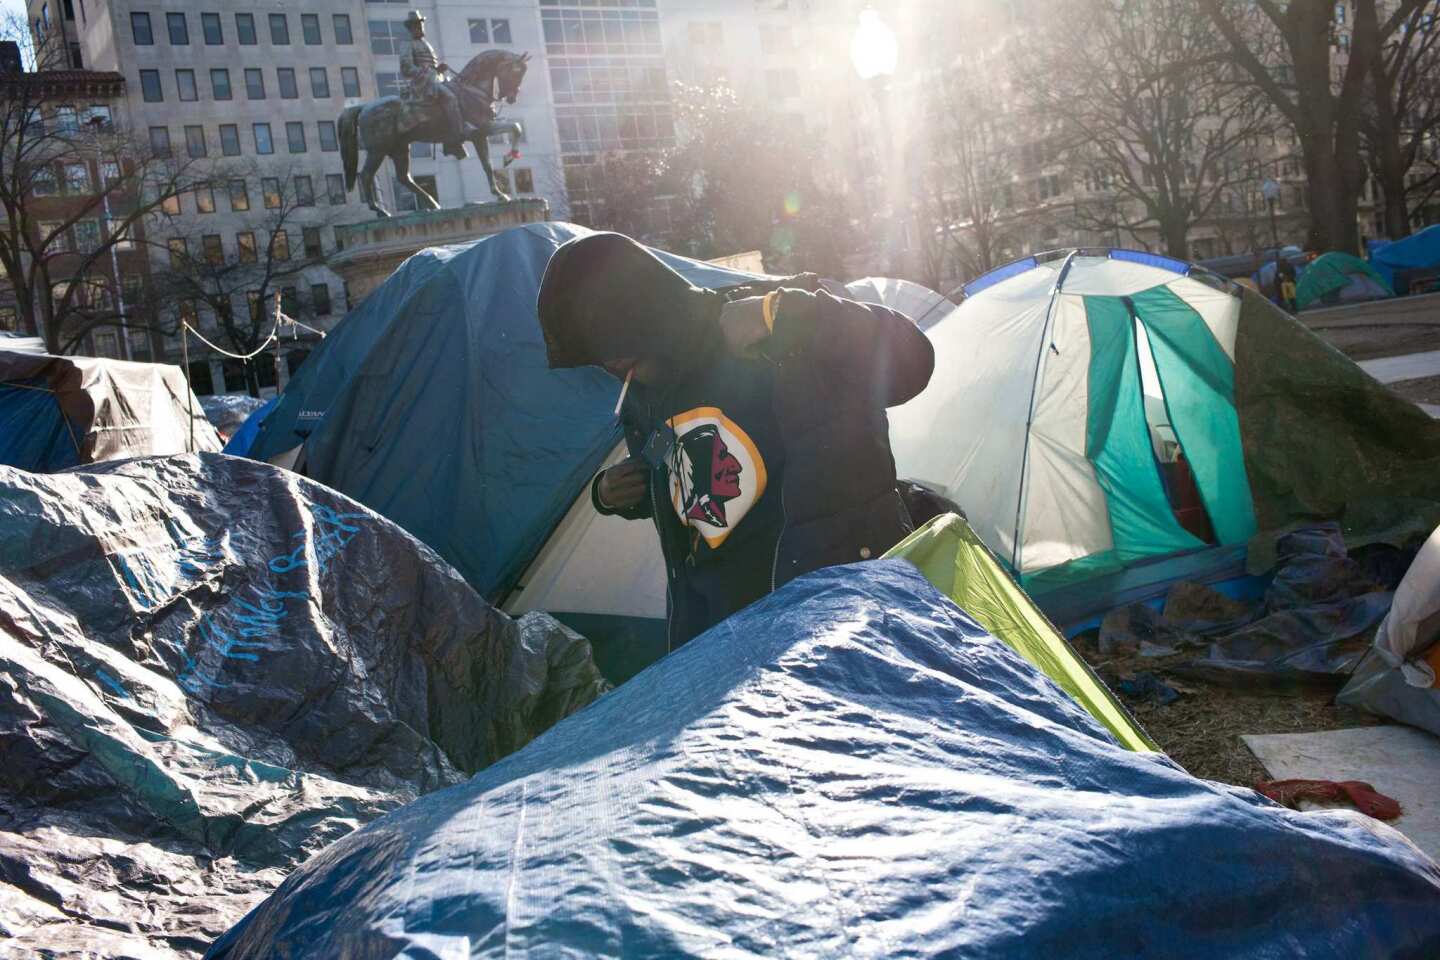 Craig Gill gets dressed outside his tent in the Occupy D.C. encampment in McPherson Square.